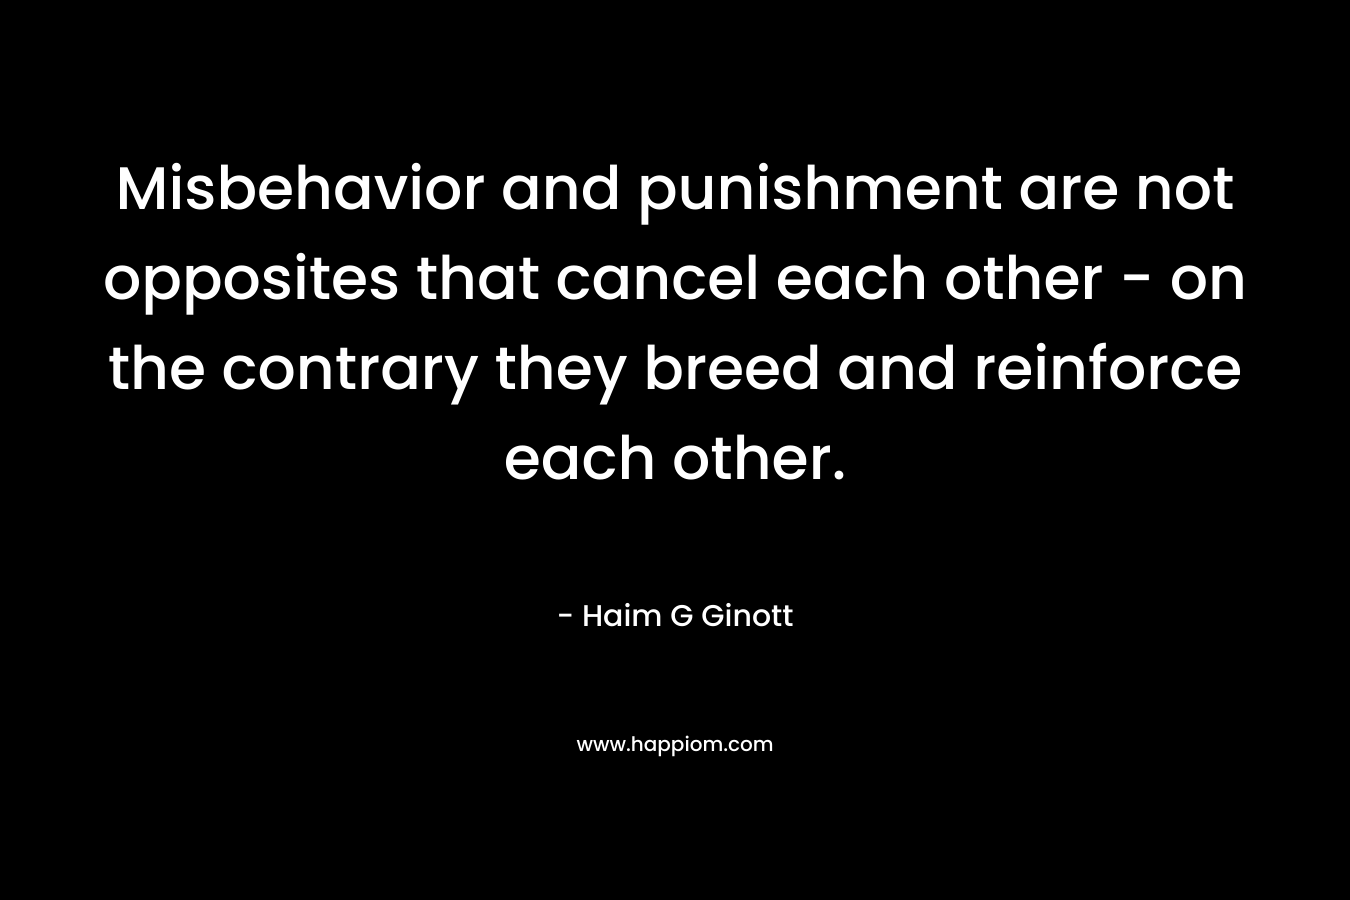 Misbehavior and punishment are not opposites that cancel each other – on the contrary they breed and reinforce each other. – Haim G Ginott